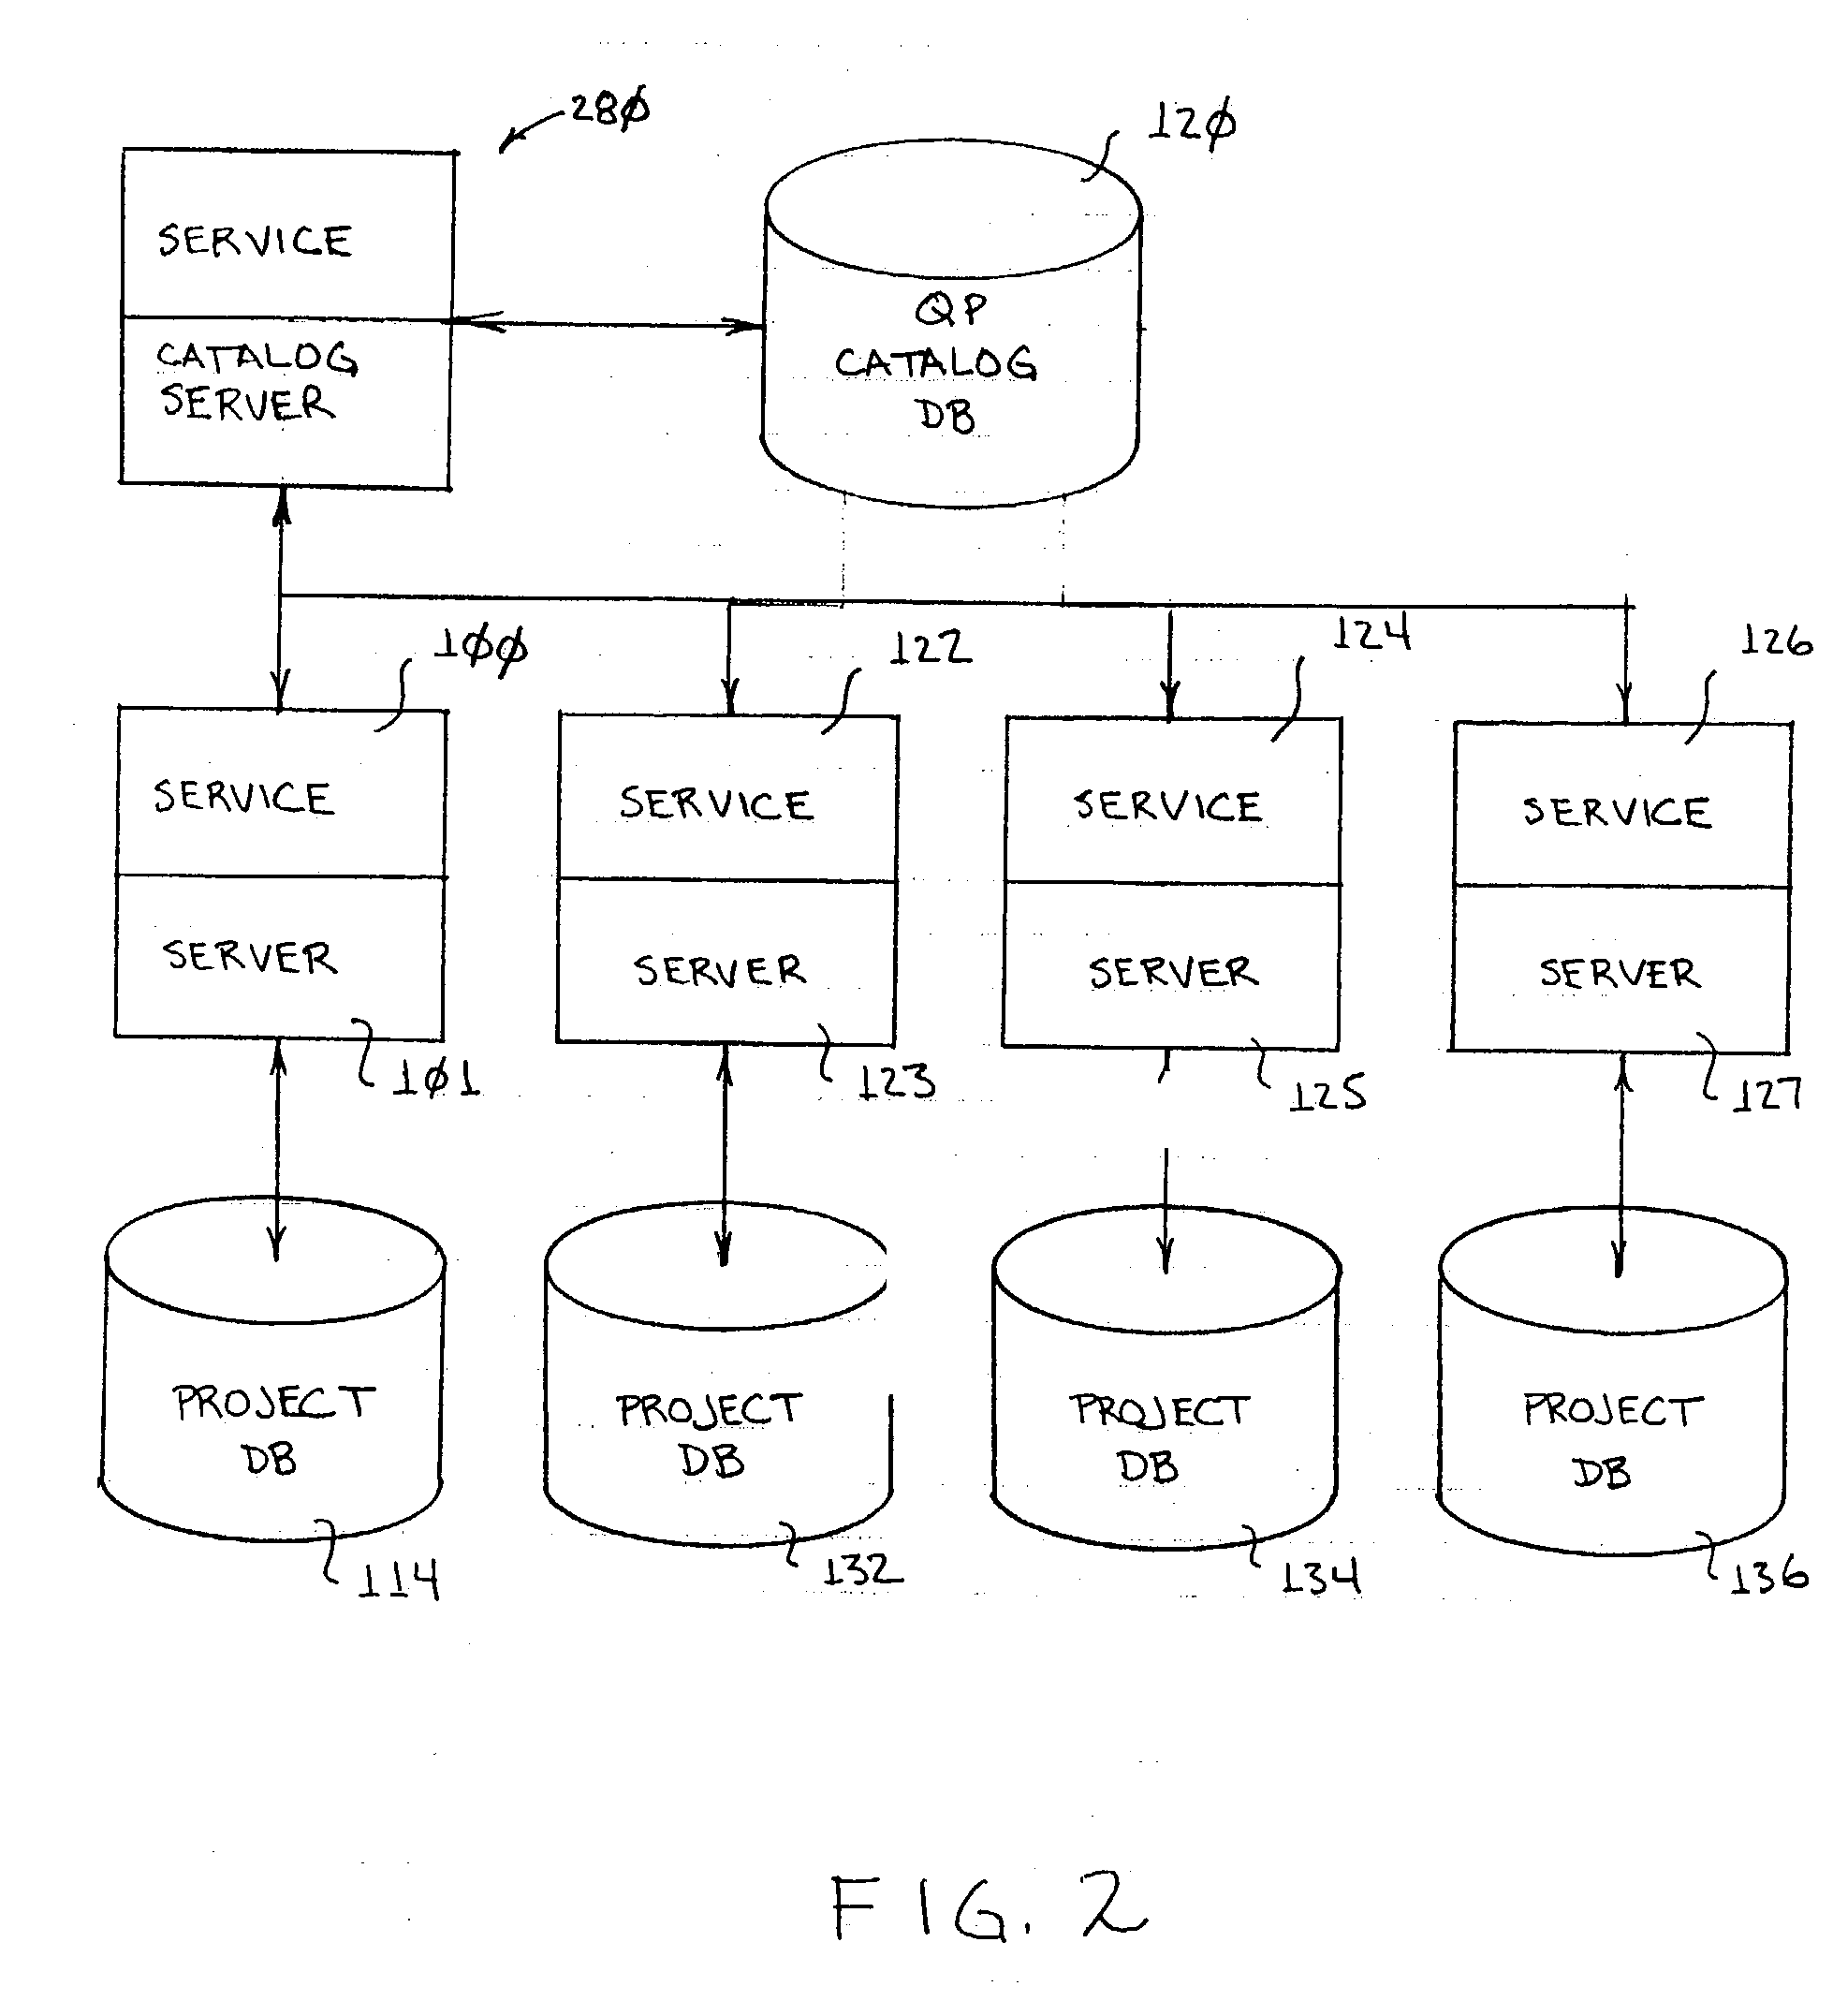 System and method for aggregating user project information in a multi-server system